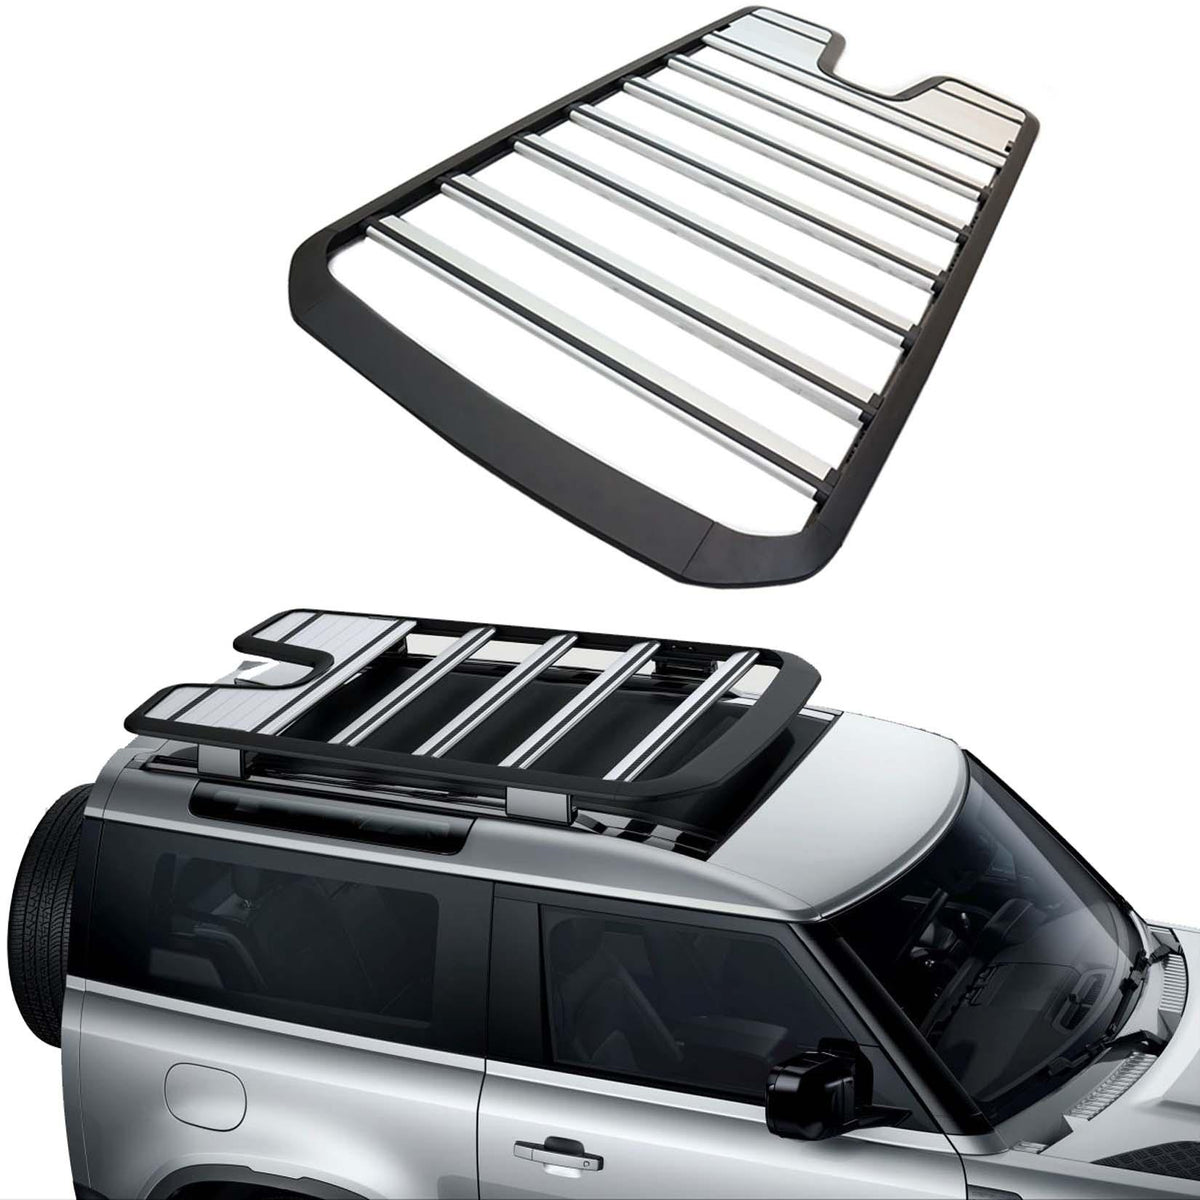 LAND ROVER DEFENDER 90 L663 2020 ON OE STYLE ROOF RACK IN SIVLER - RisperStyling